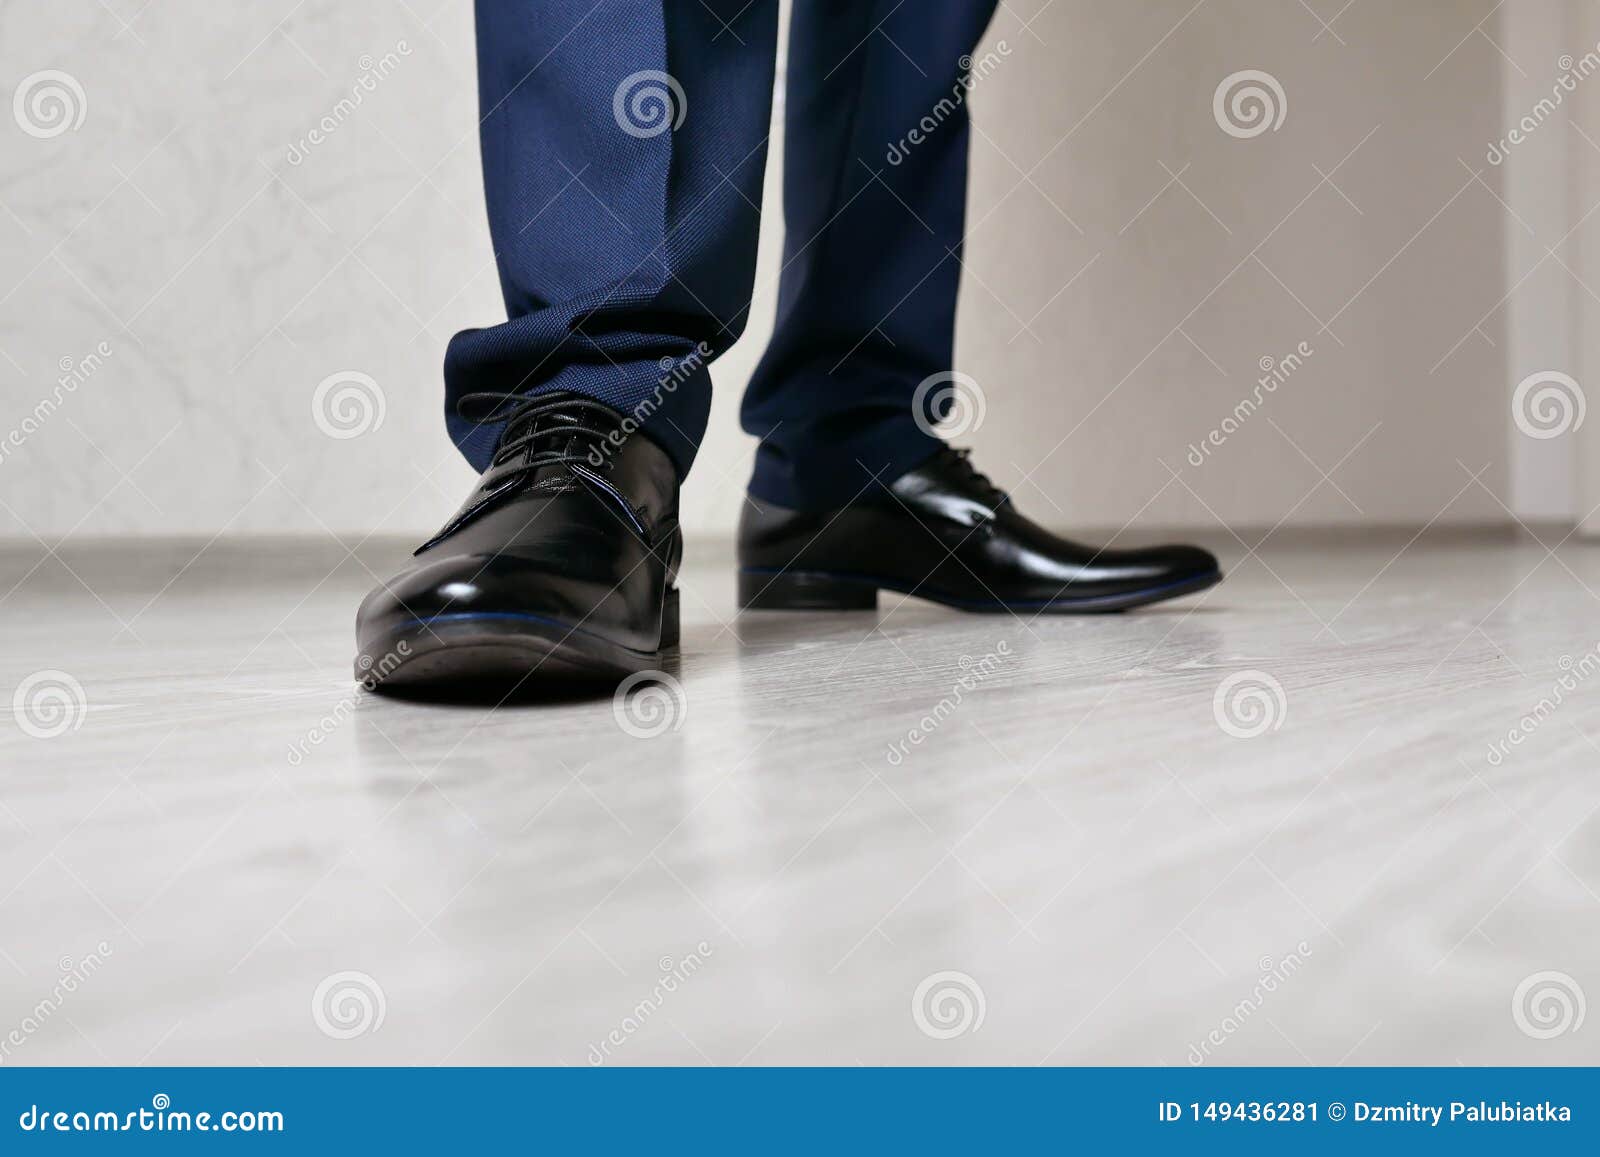 Men Feet in Black Shoes Close-up Stock Image - Image of laces, boots ...